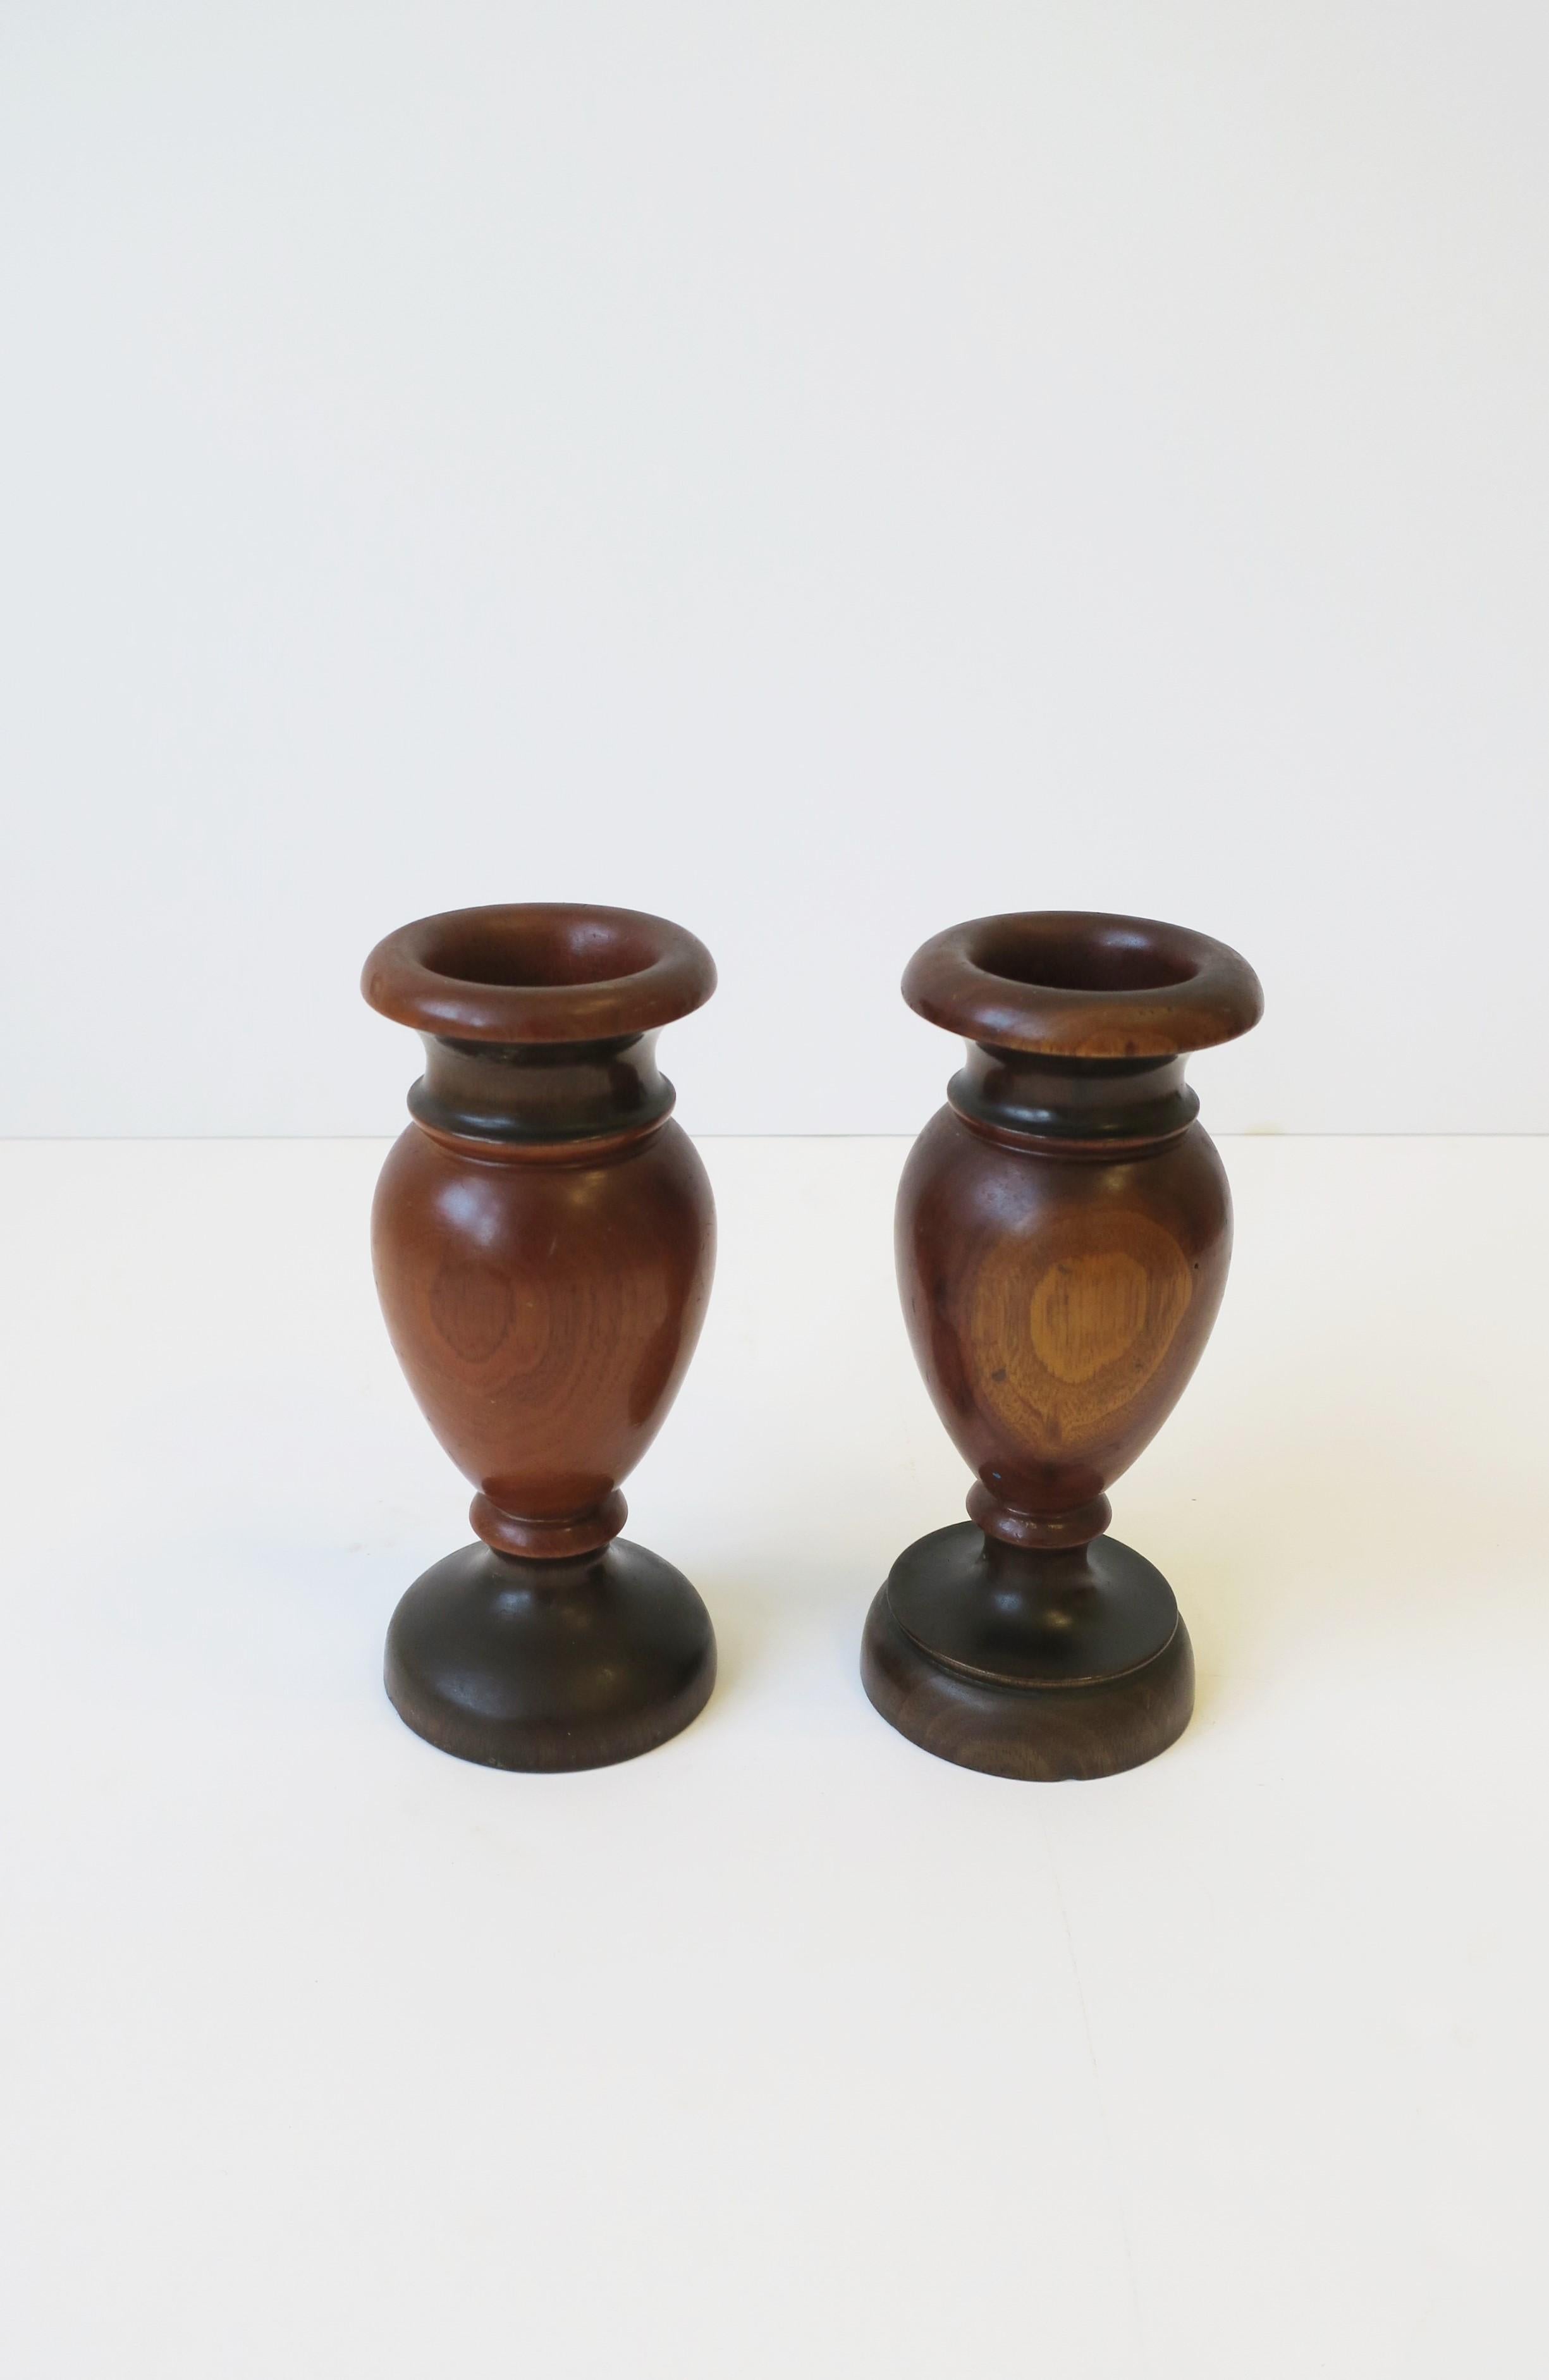 English Turned Walnut Urn Wood Spill Vases, Pair, circa 19th Century For Sale 6